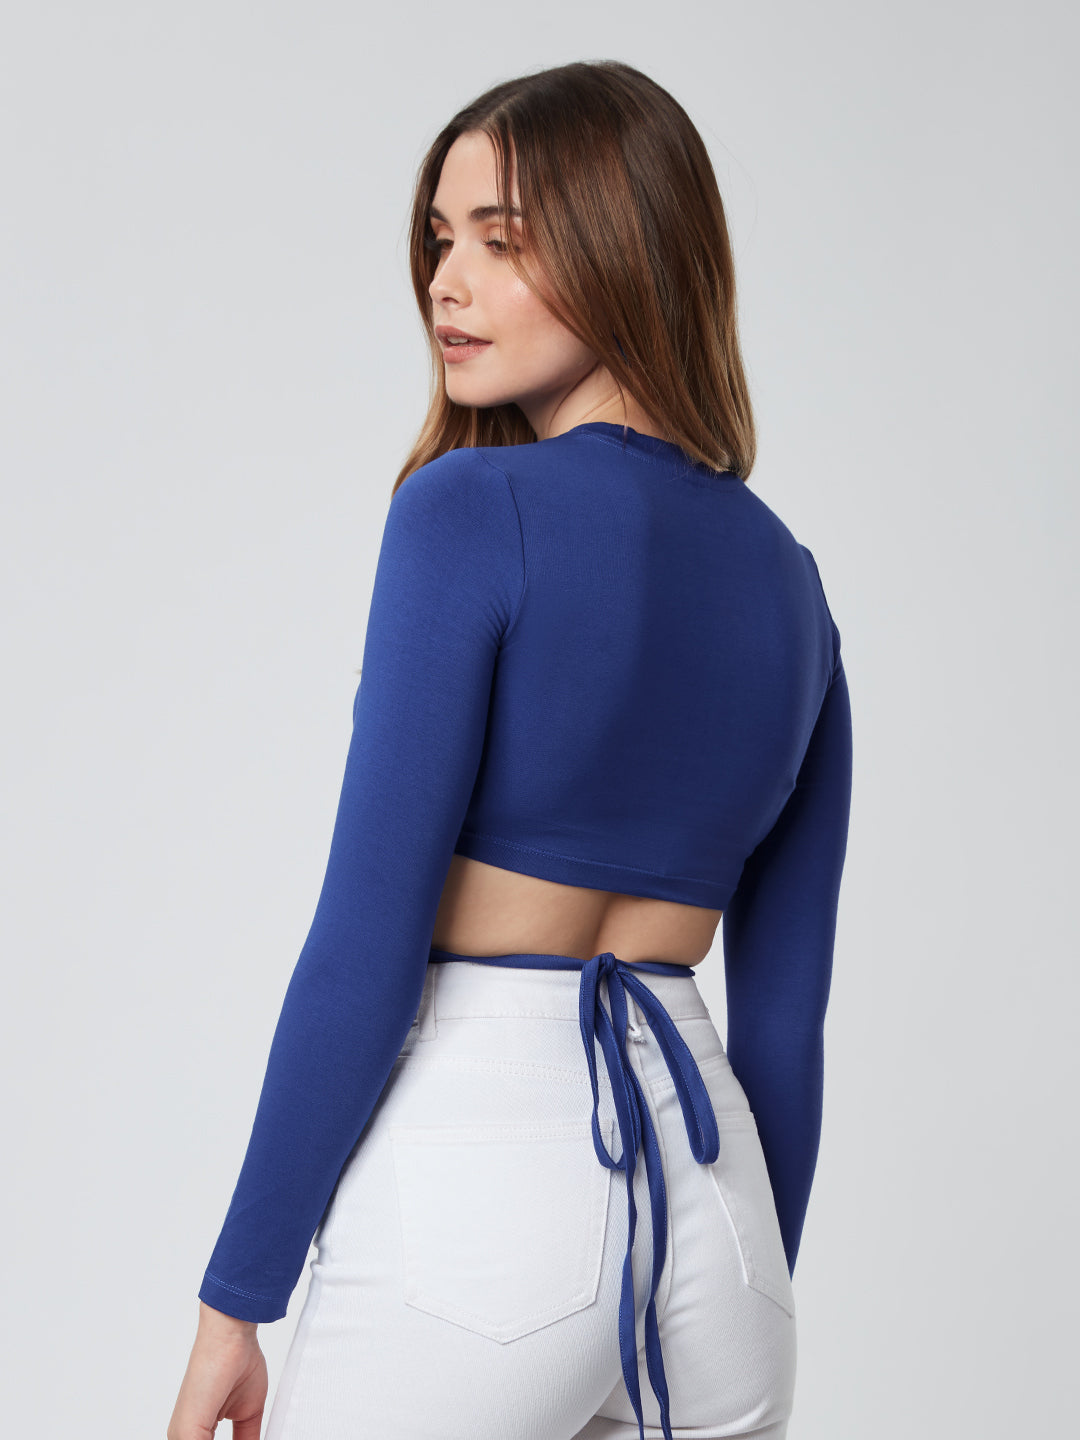 Solids: Electric Blue (Cropped Fit)